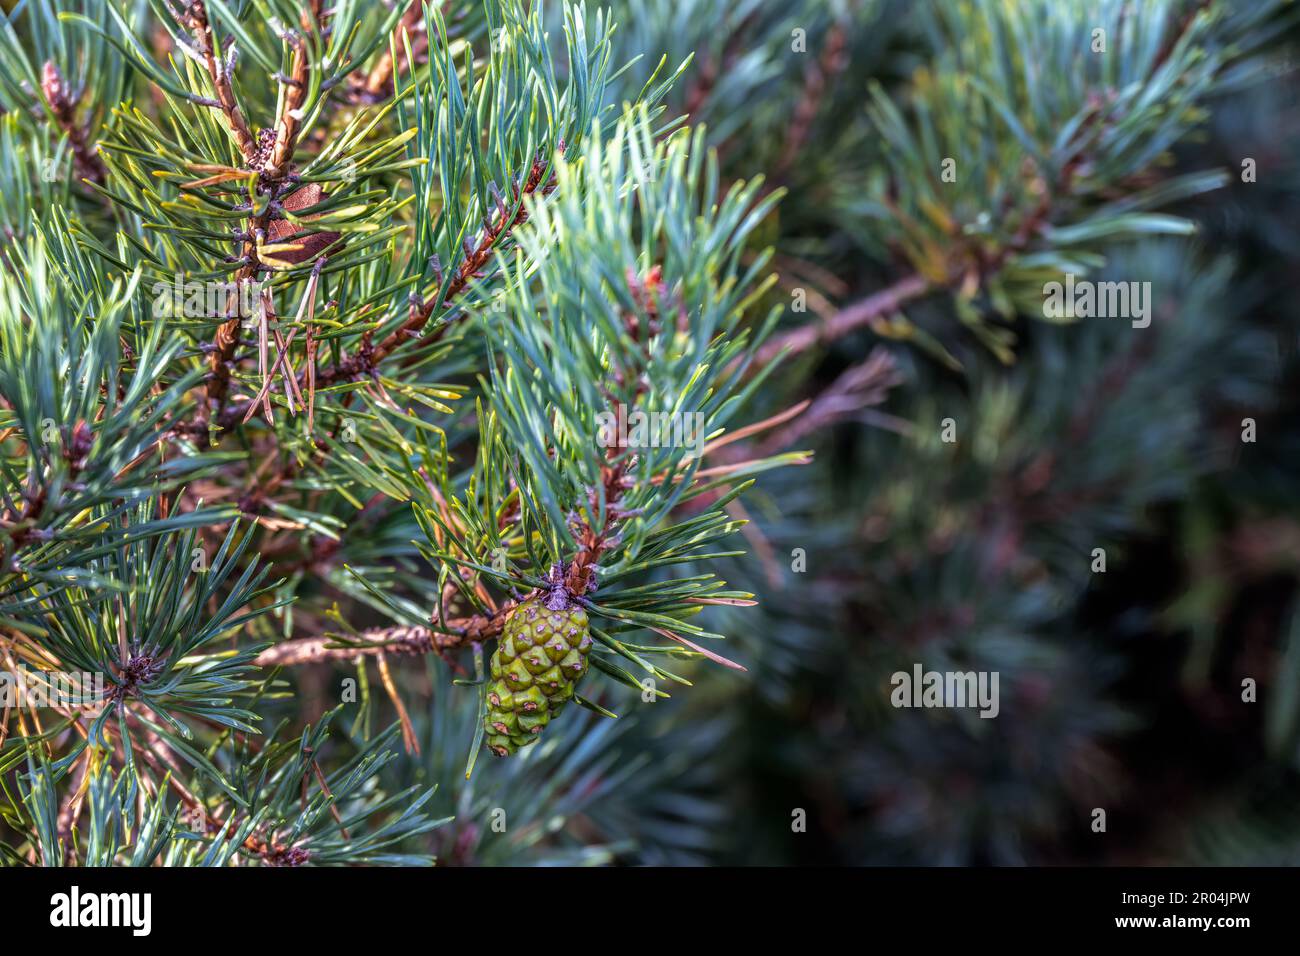 Pinus sylvestris or Scots pine cone growing on the tree in summer, close up Stock Photo